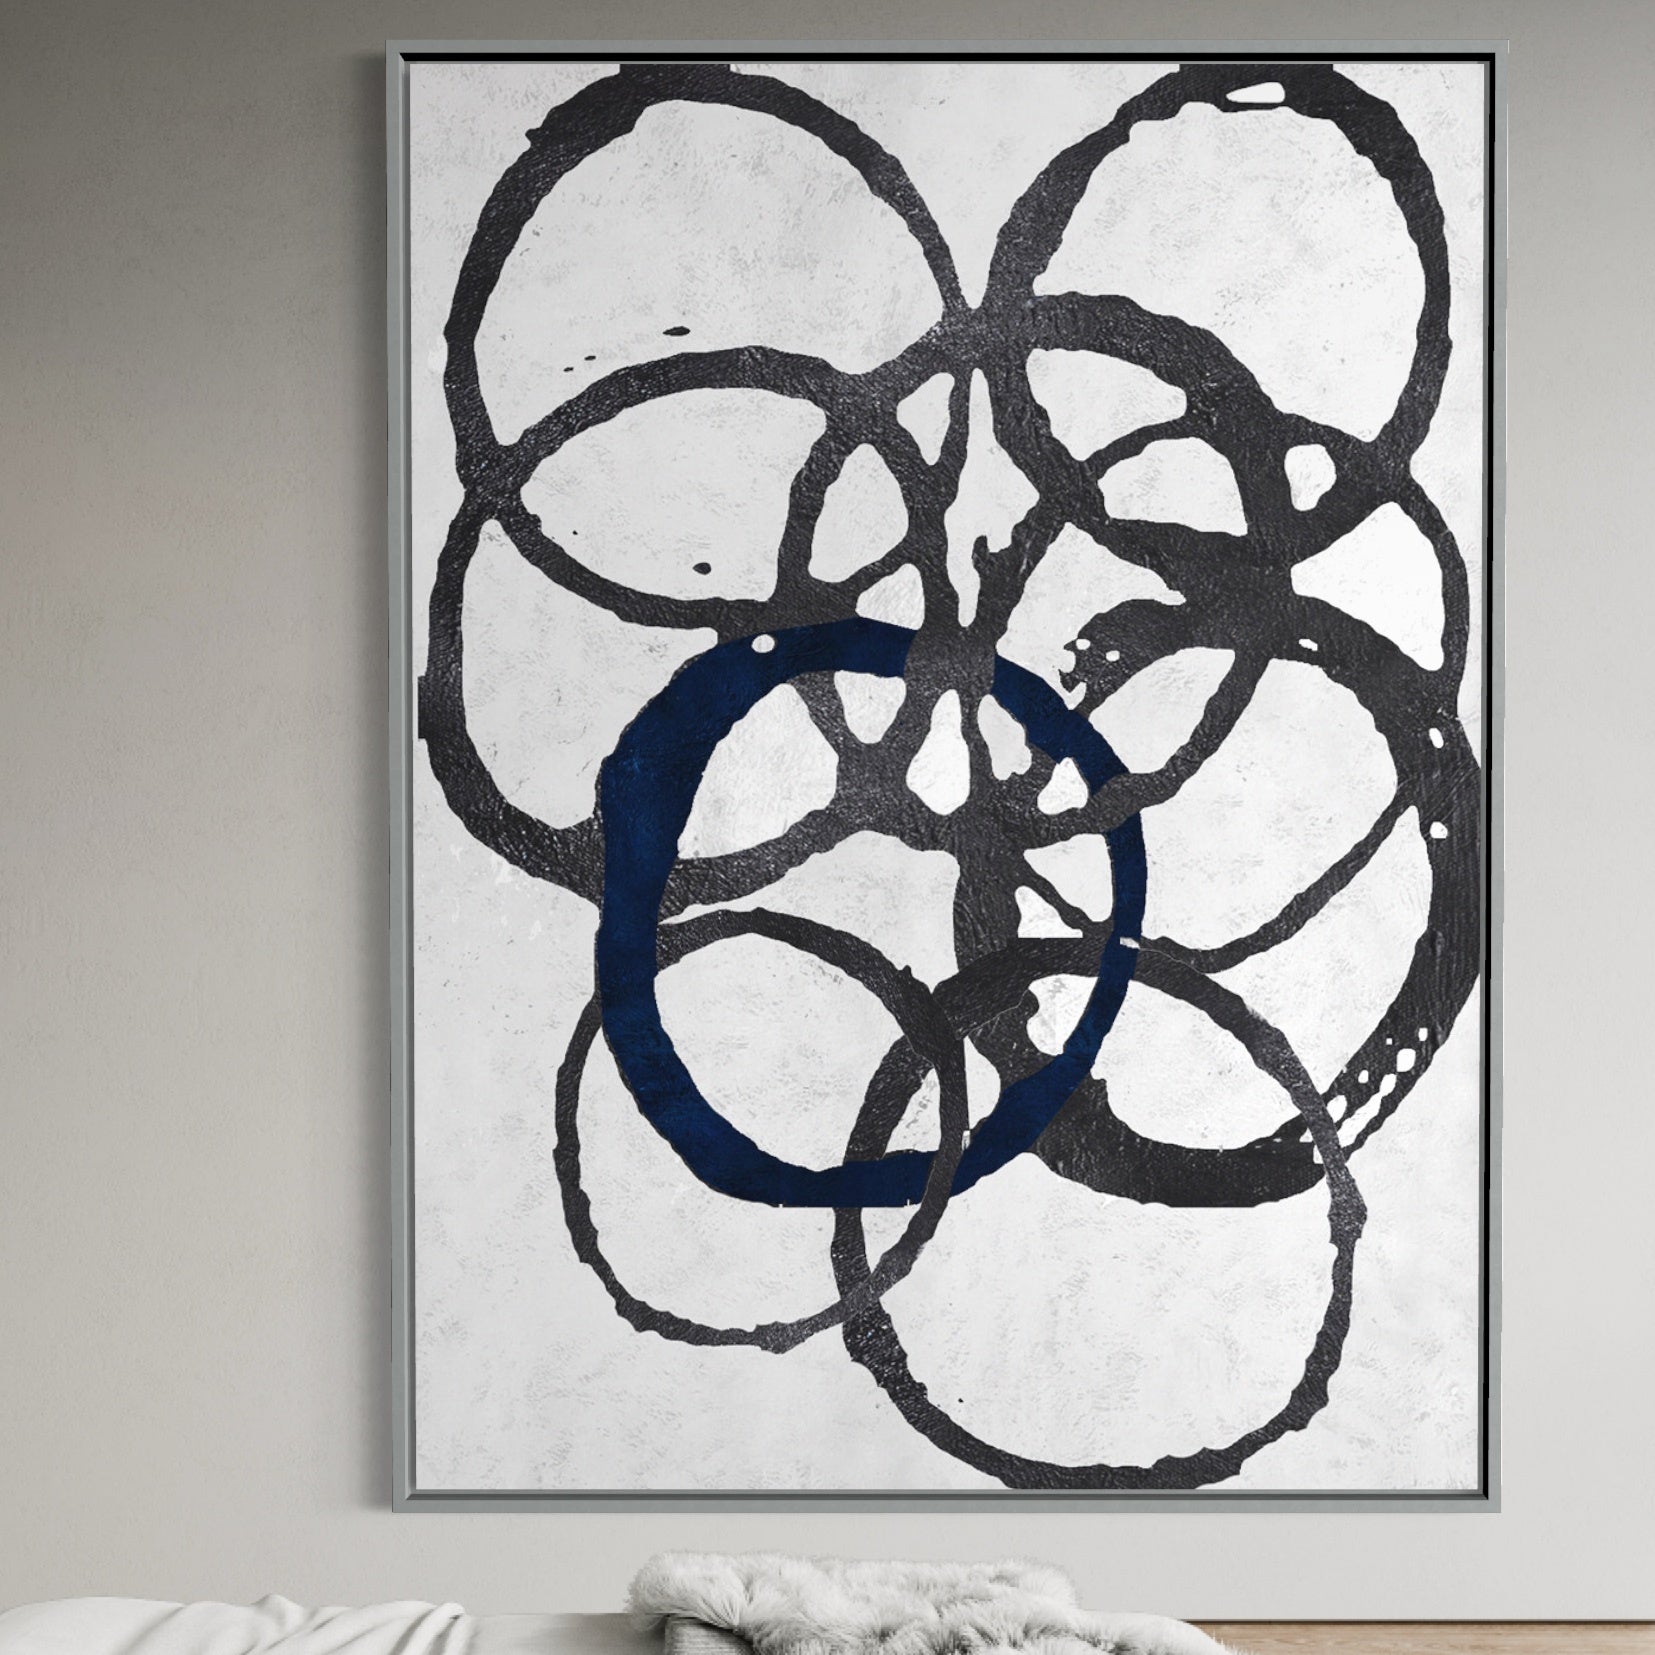 Circles And Charcoal, Wood (Birch) / 75x100cm